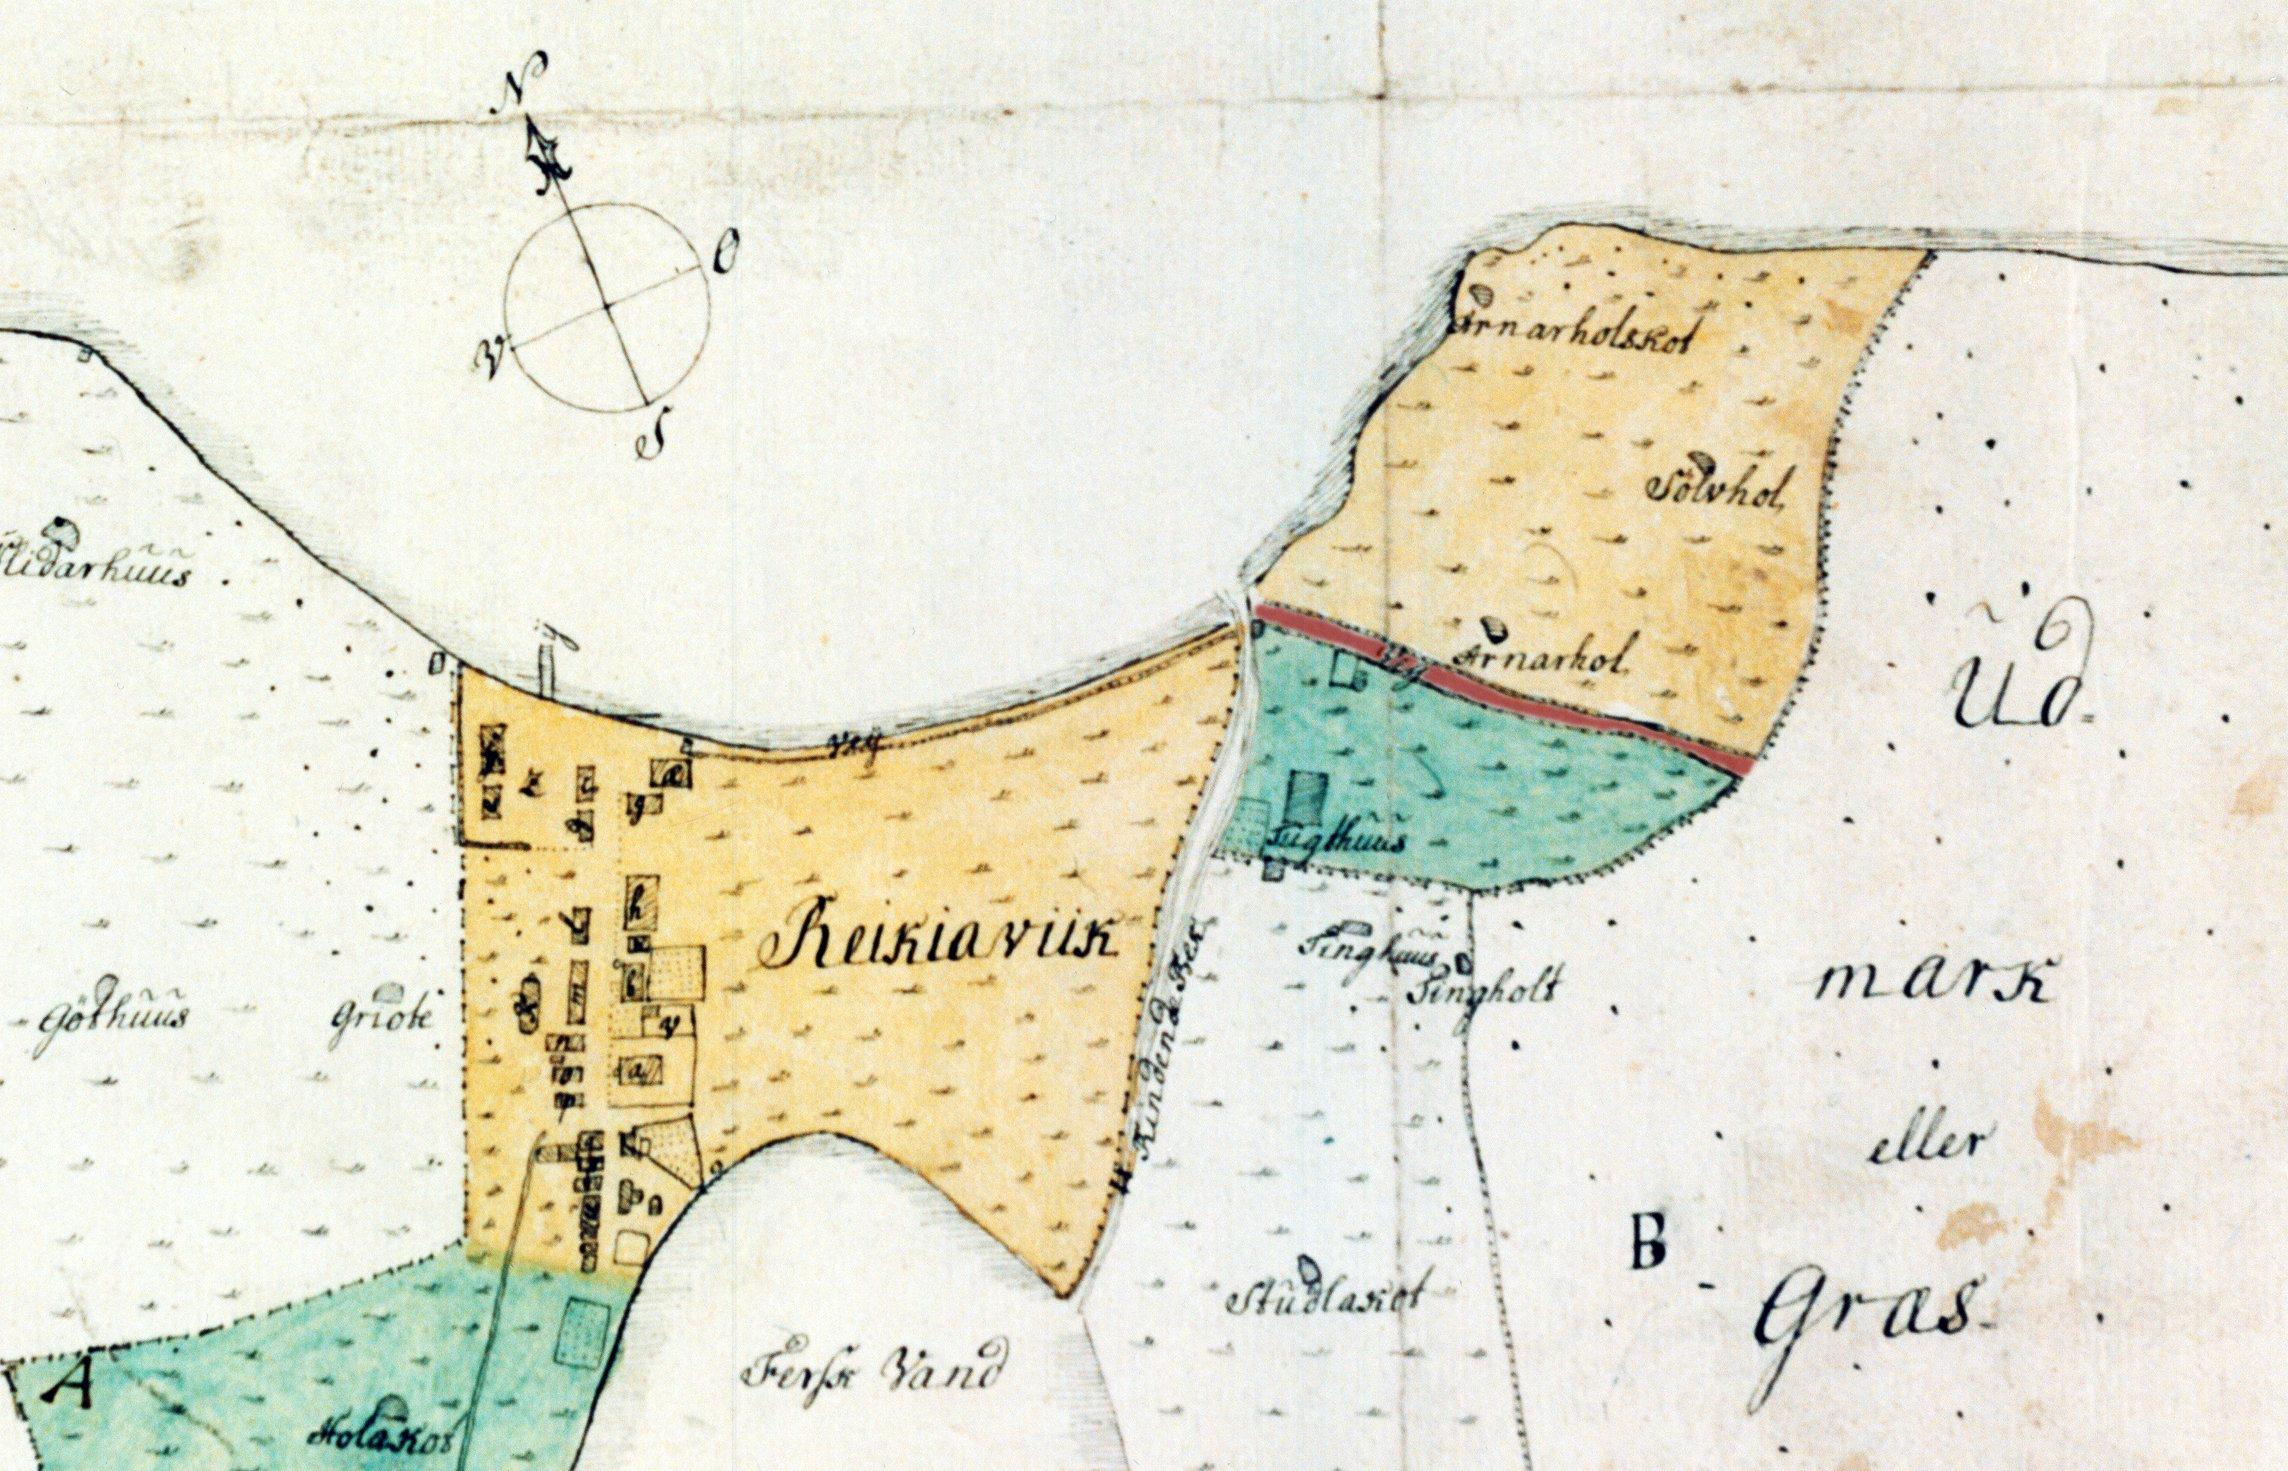 In 1787 Reykjavík was granted its town charter. On that occasion a map was drawn up of the extent of the land allocated to the new town